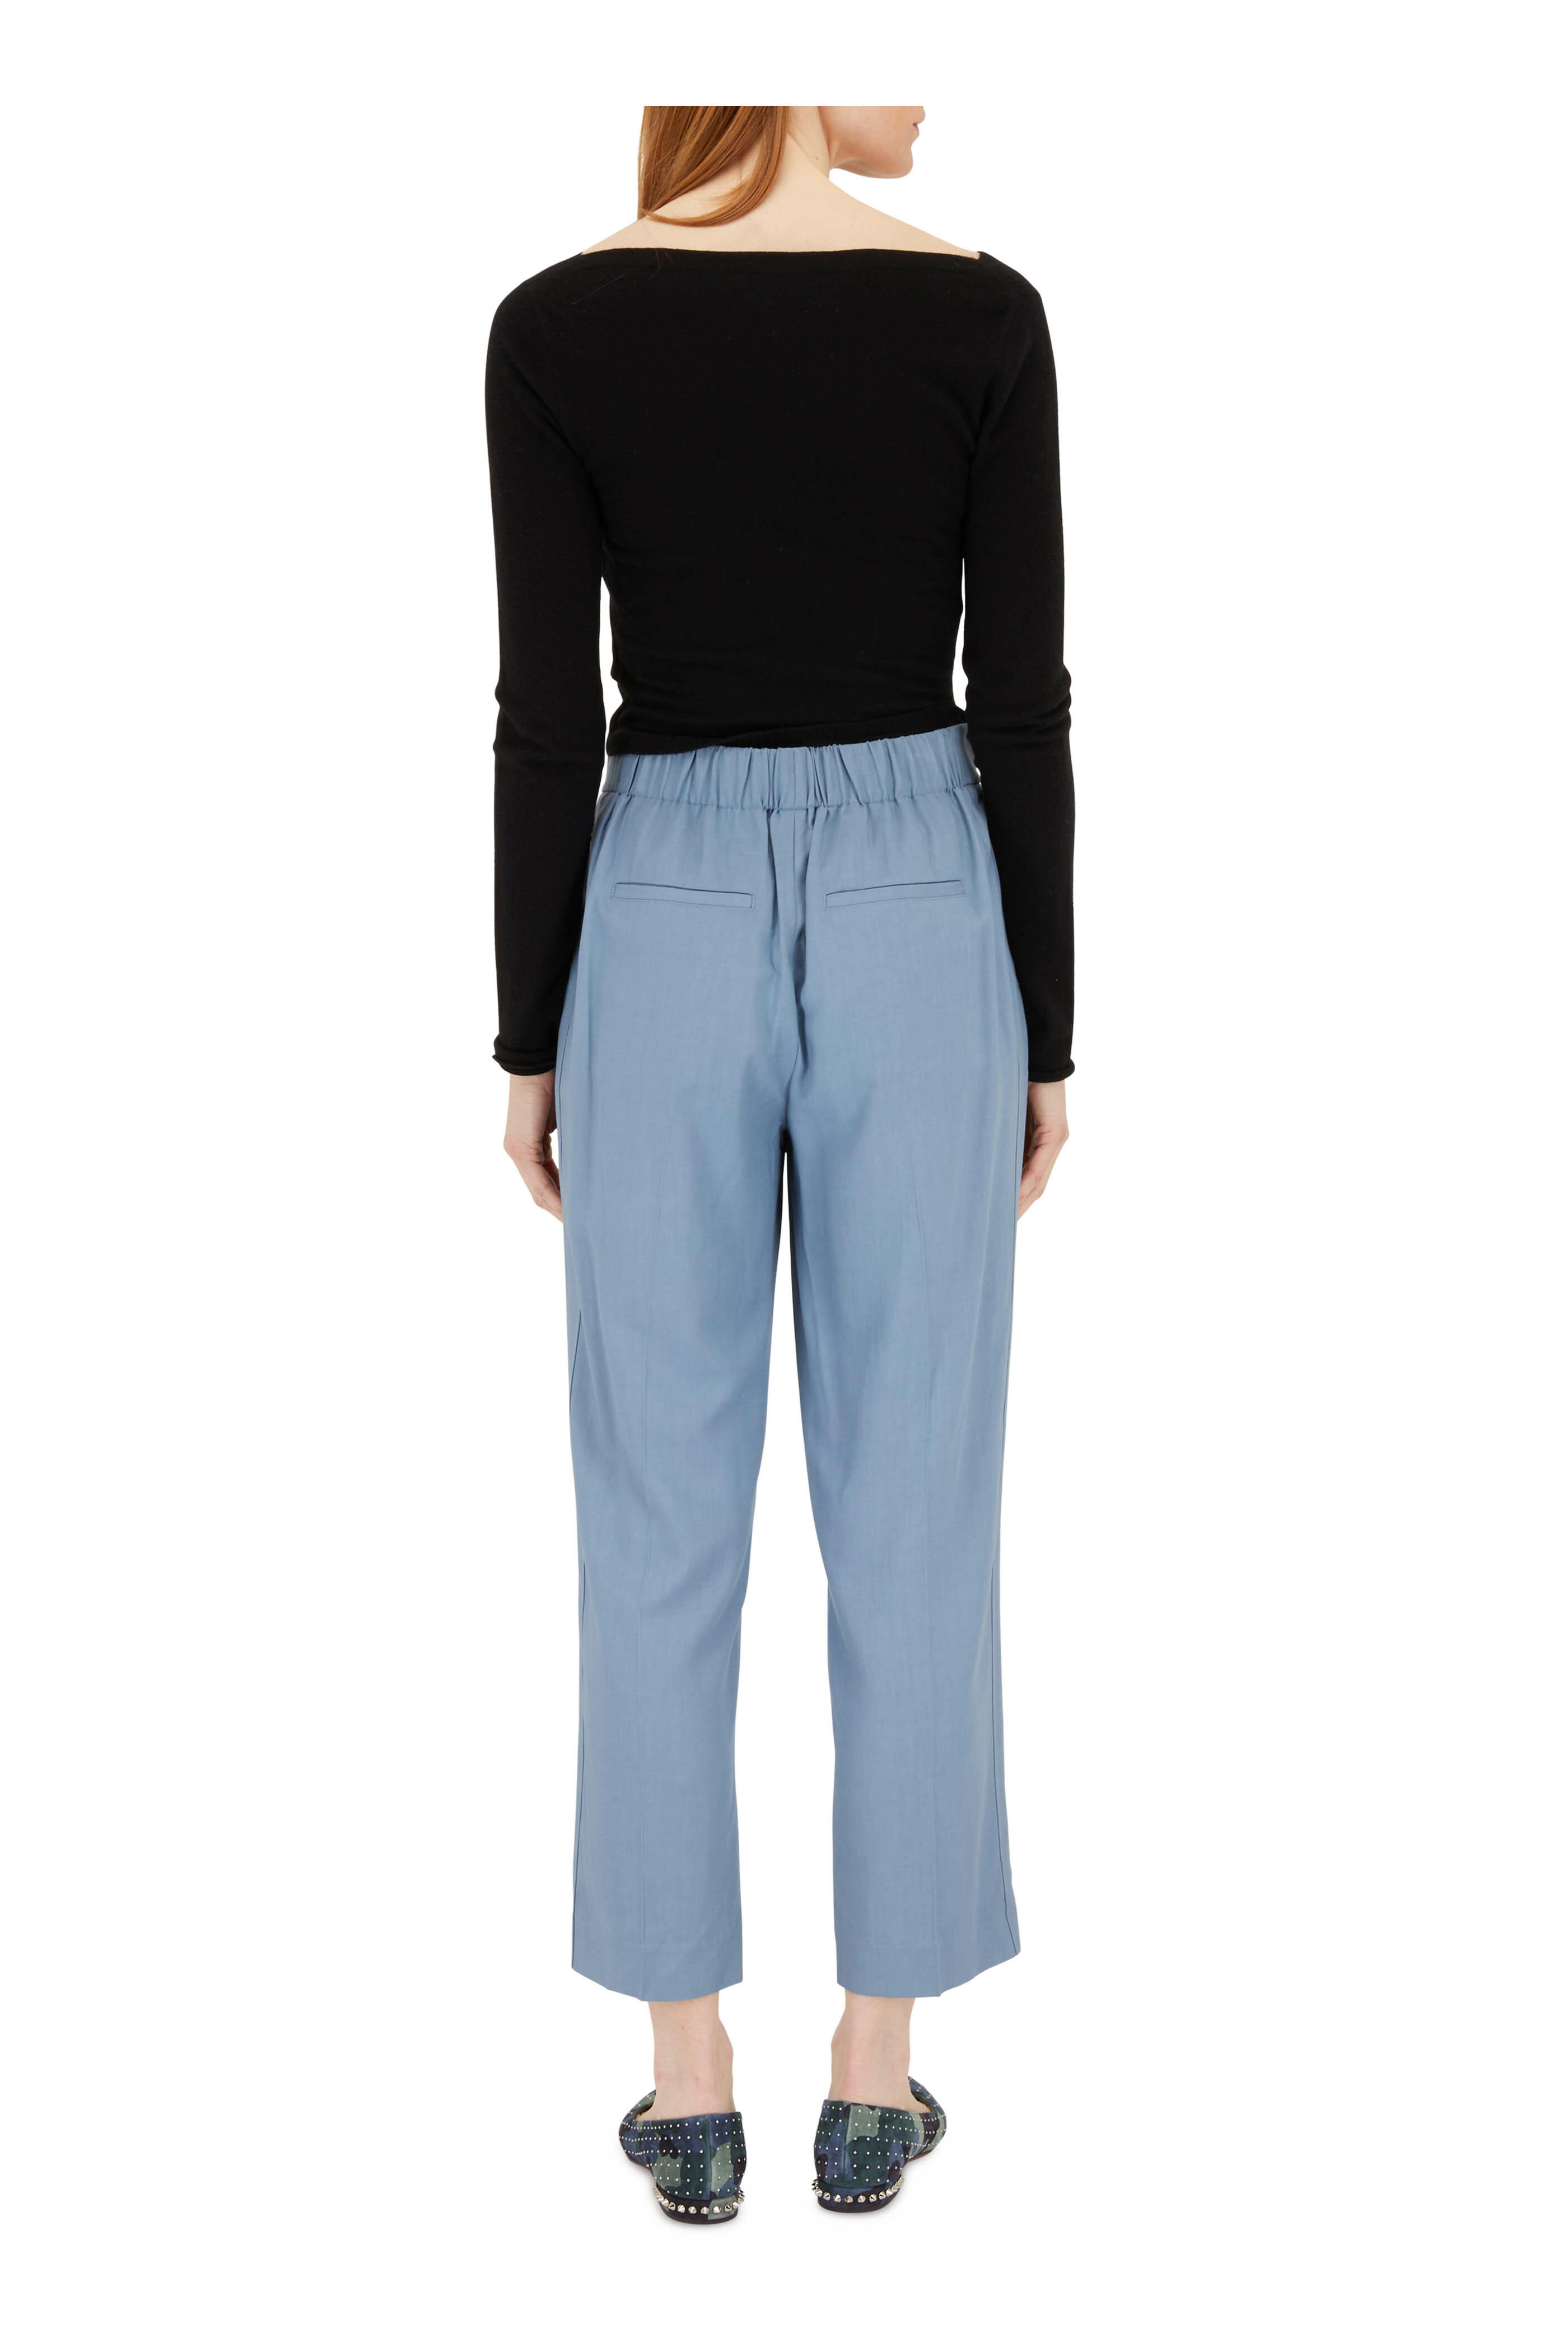 Vince - Dark Piero Blue Drapey Pull-On Pant | Mitchell Stores